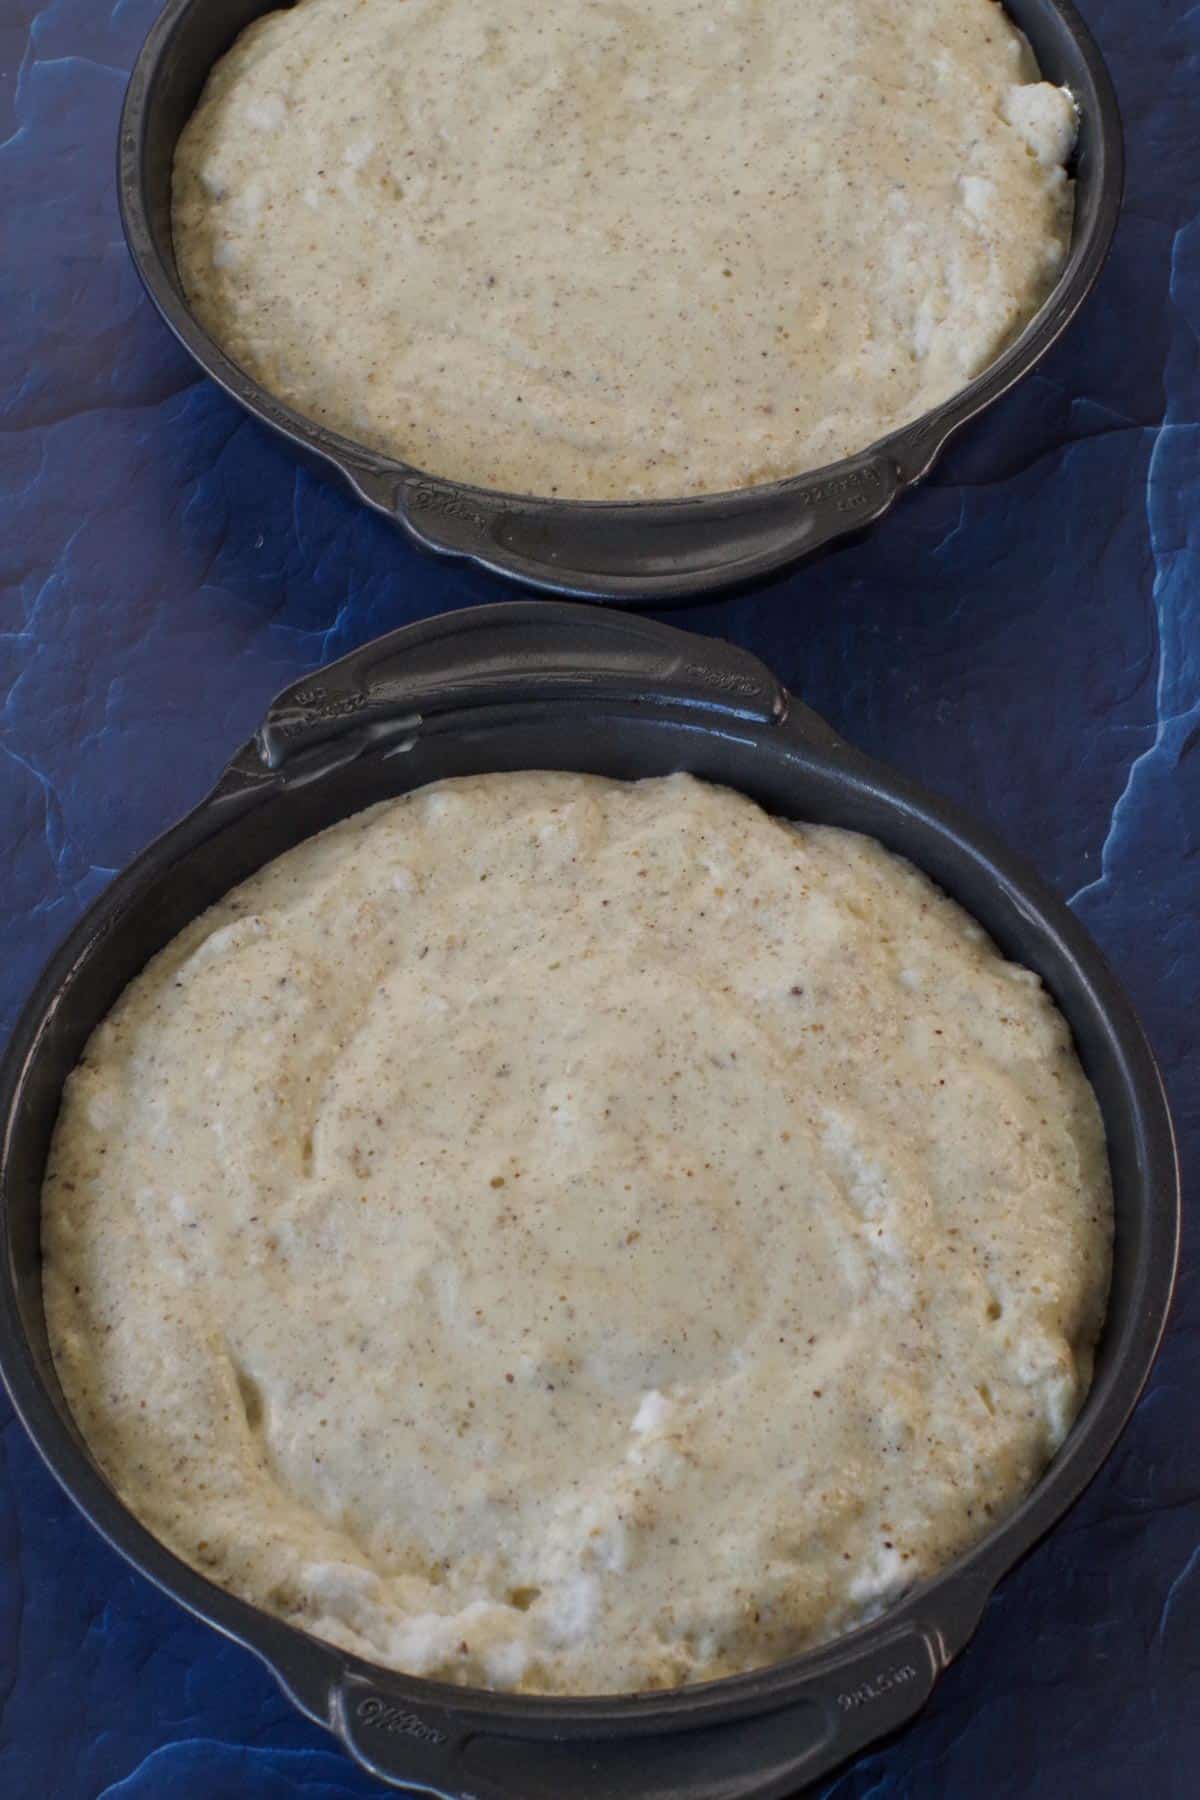 batter poured into 2 round layer cake pans